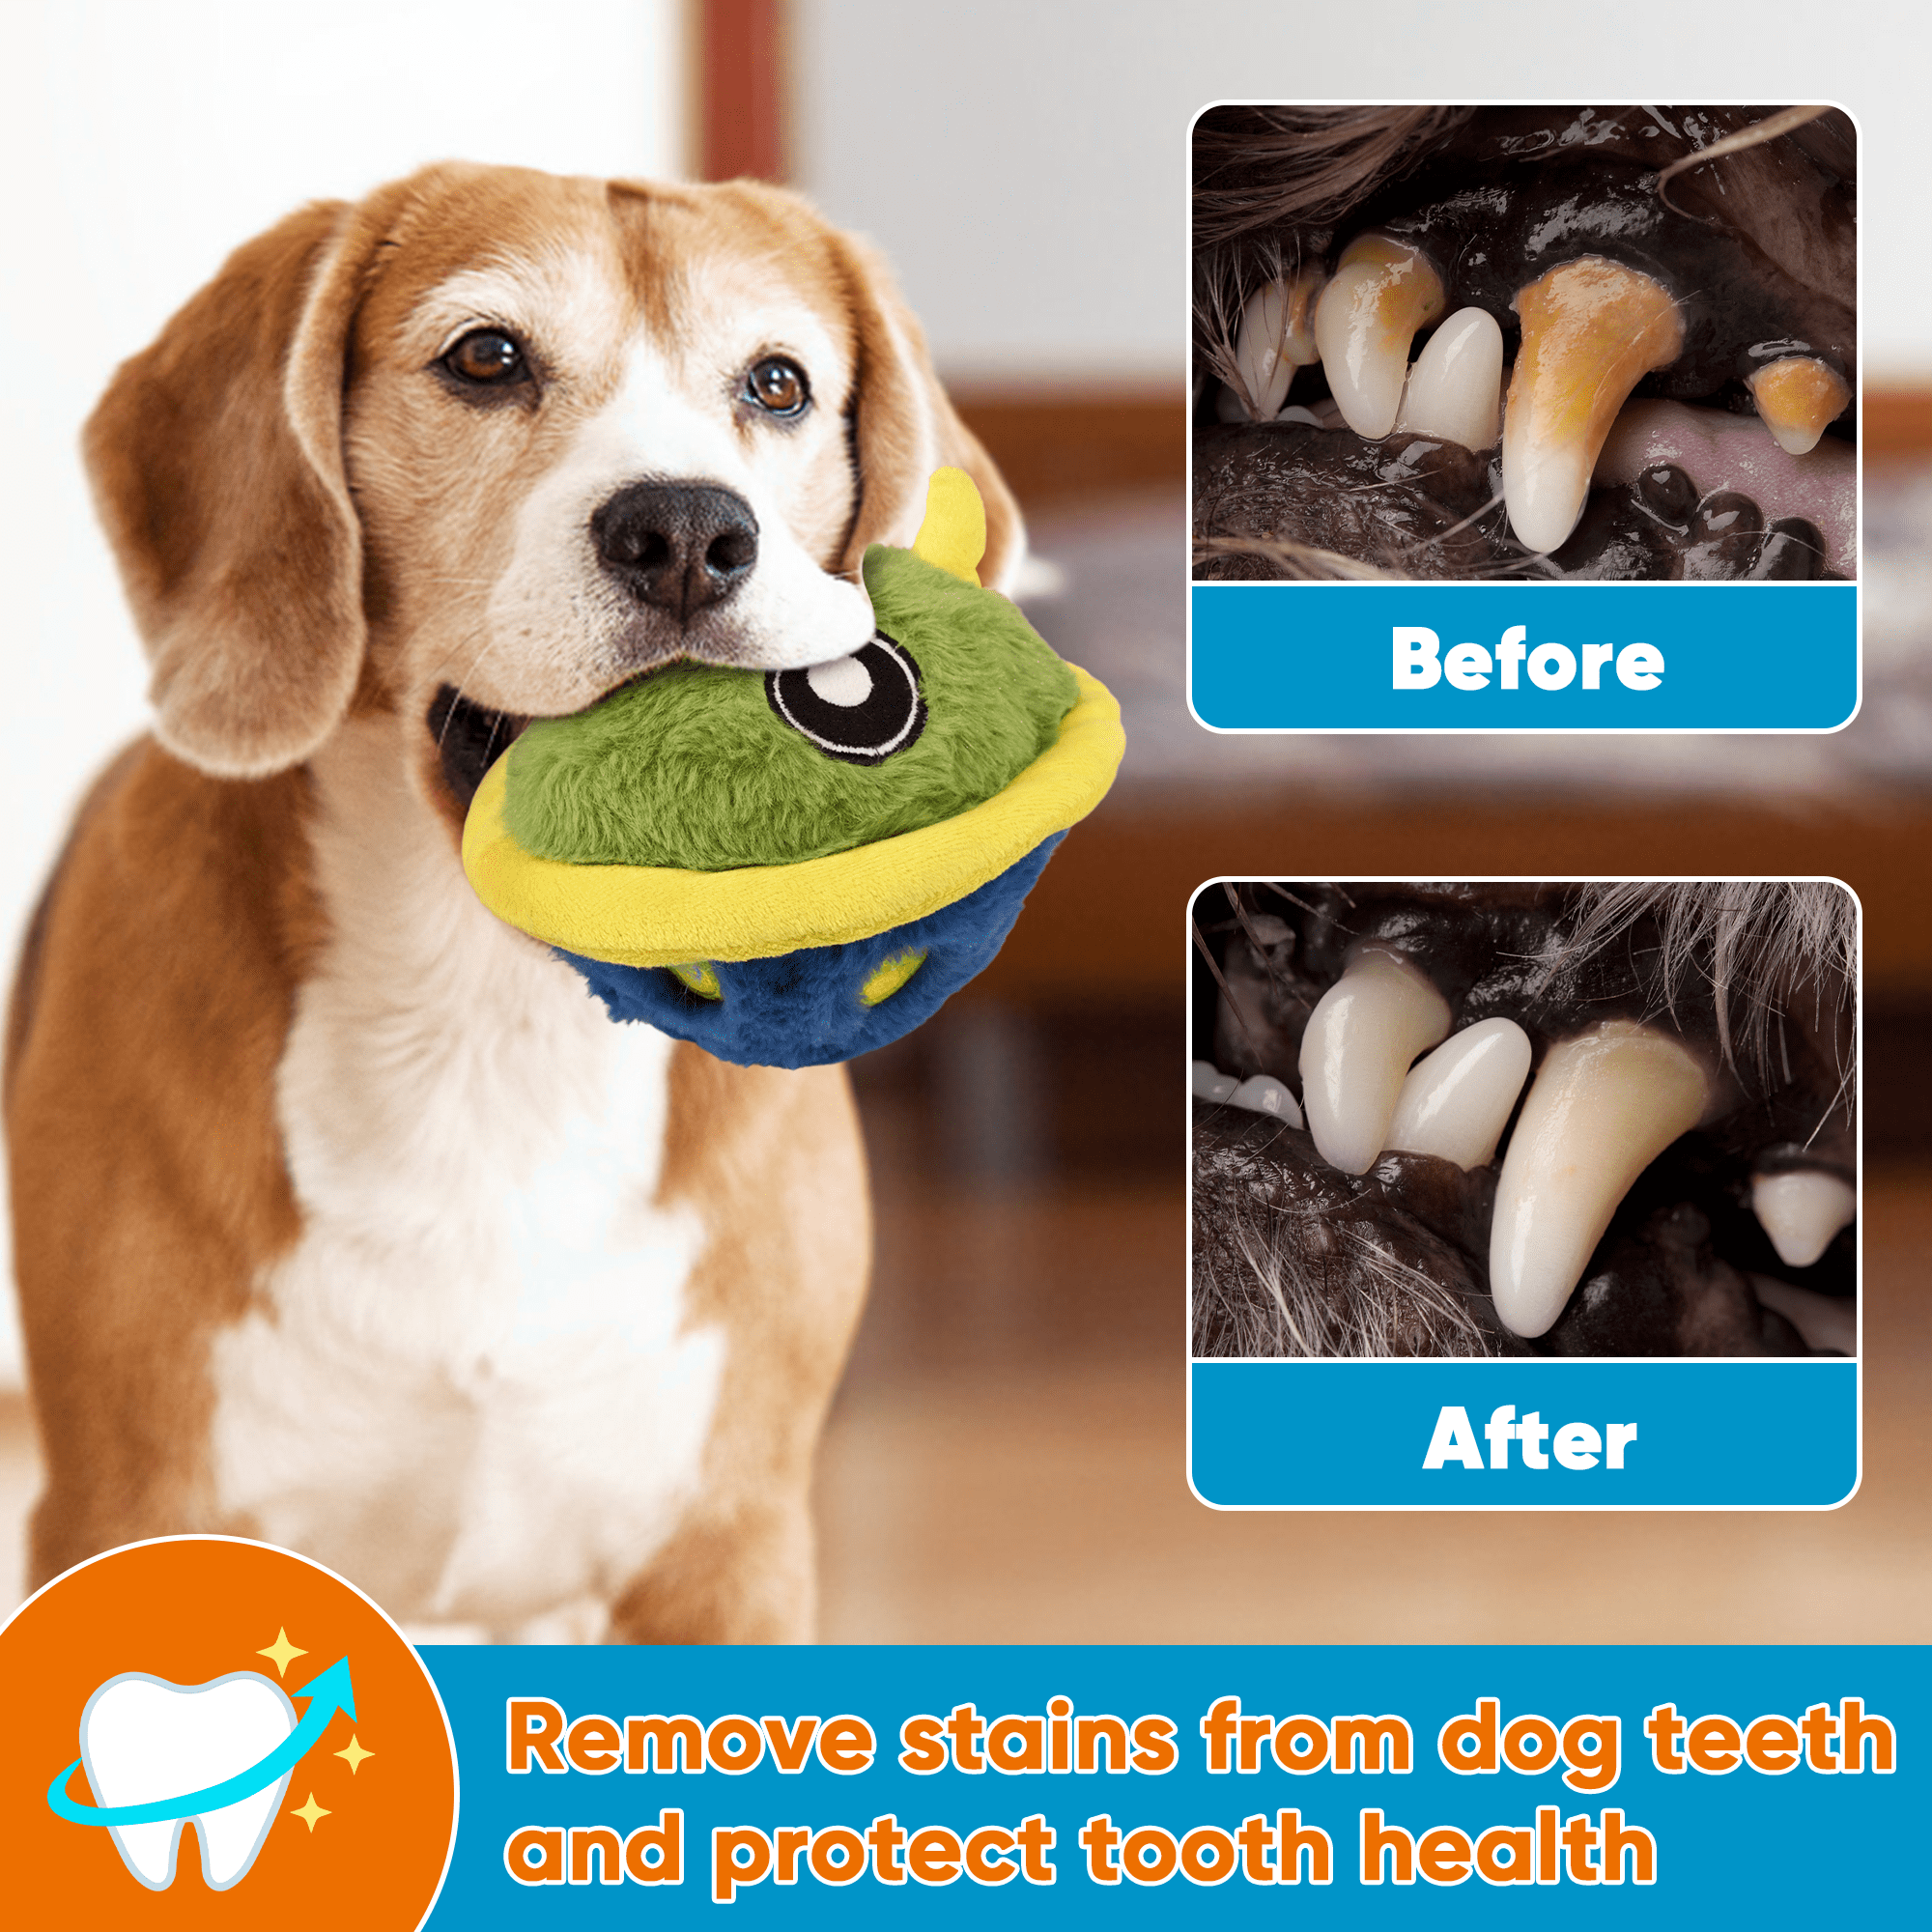 Petbobi Dog Ball Toys for Aggressive Chewers, Wobble Giggle Interactive  Ball for Medium Large Dogs 